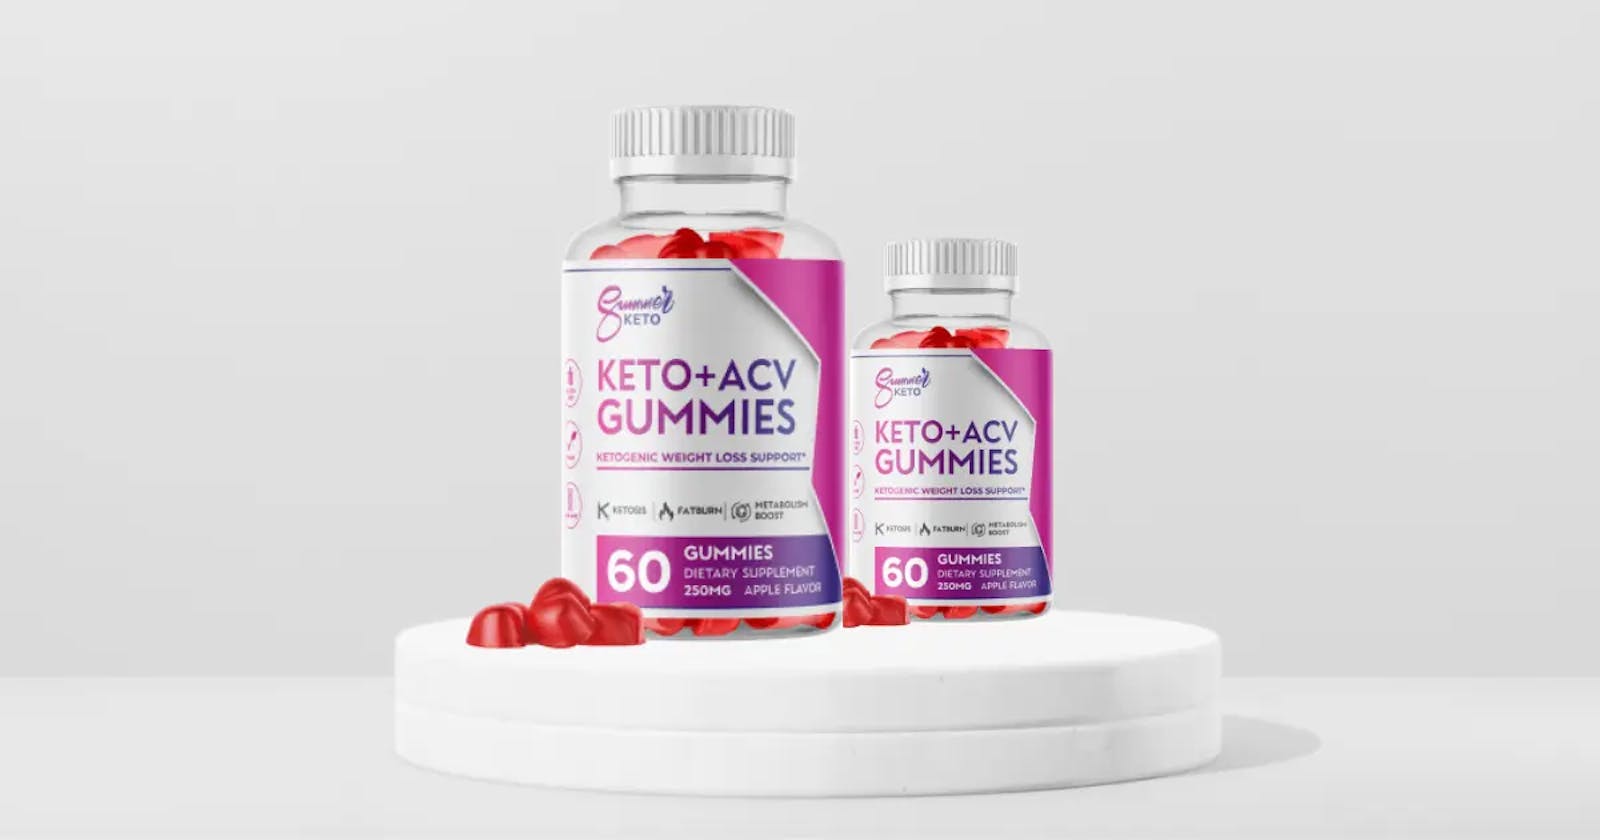 Proton Keto Acv Gummies Awards: 10 Reasons Why They Don't Work & What You Can Do About It